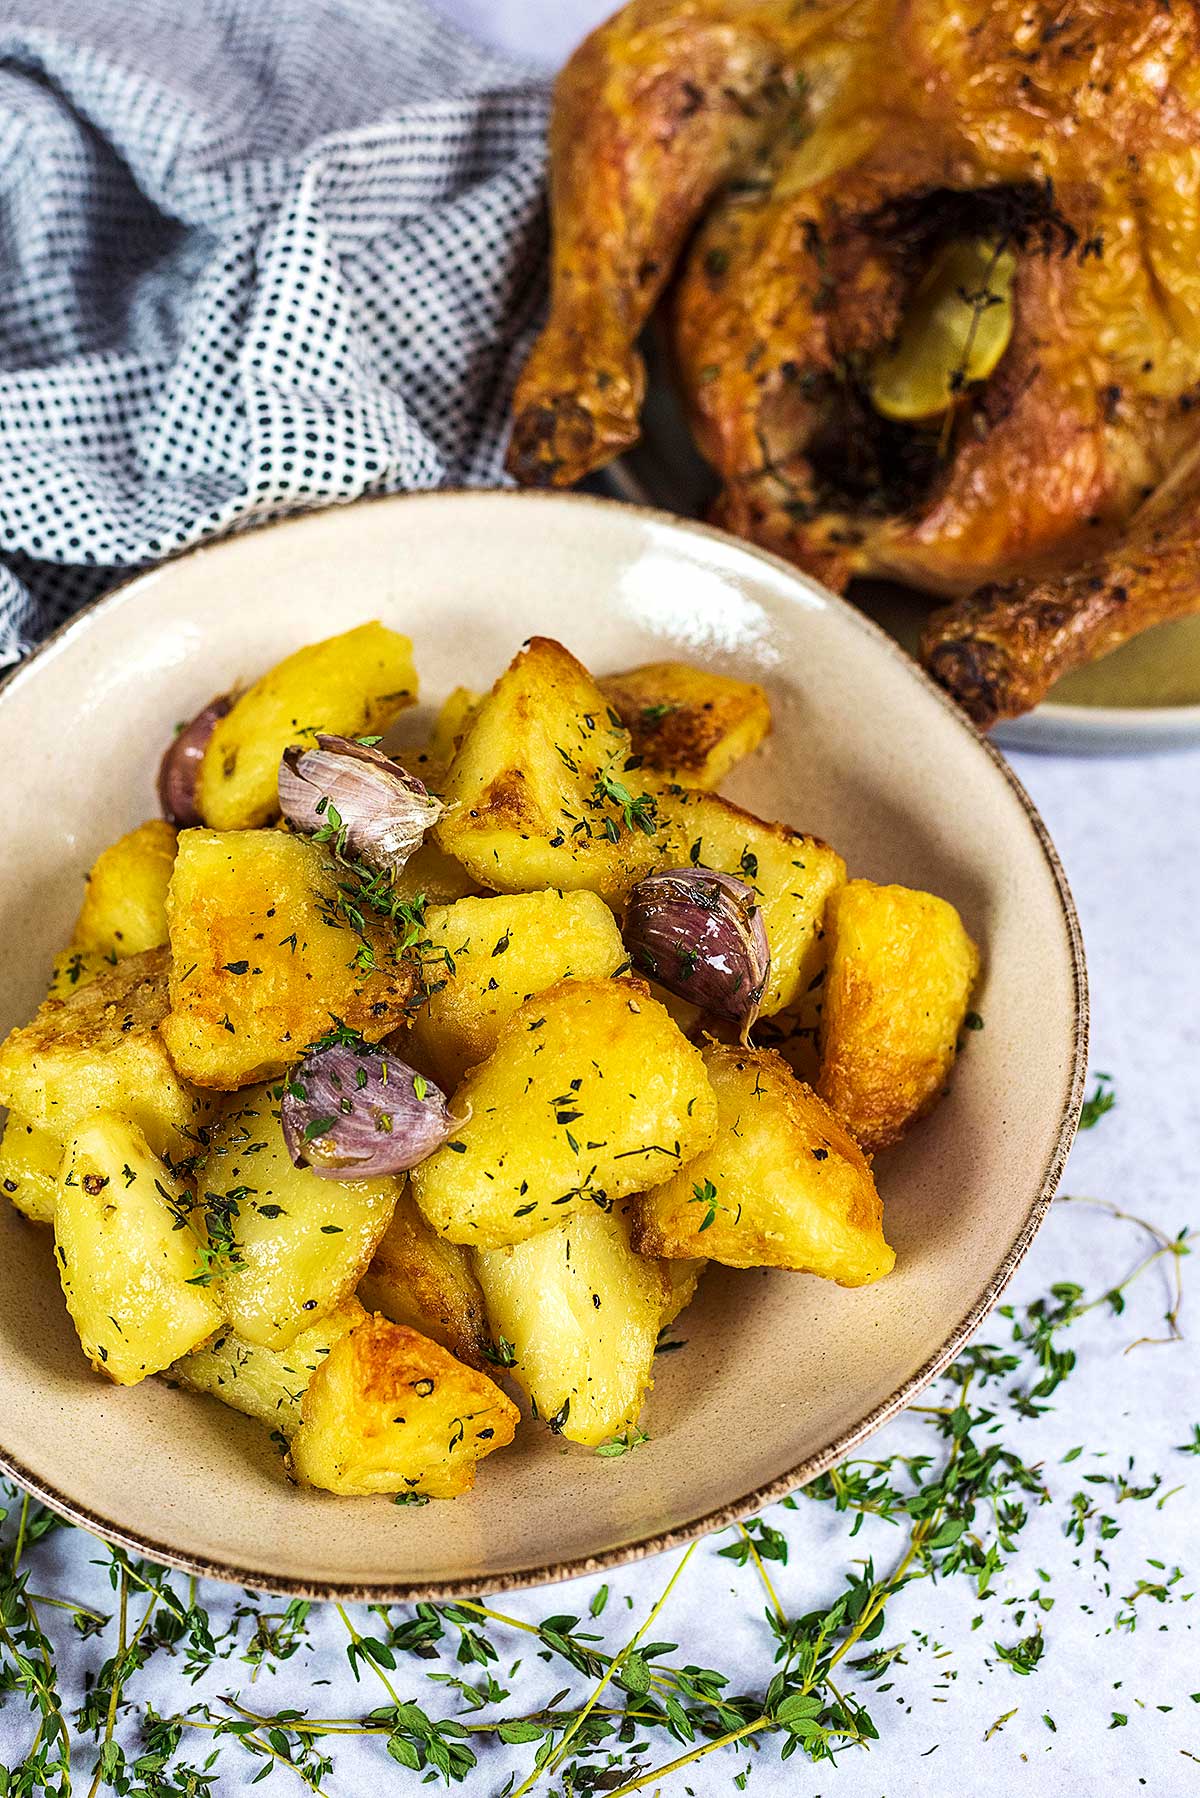 A bowl of roast potatoes in front of a whole roast chicken.